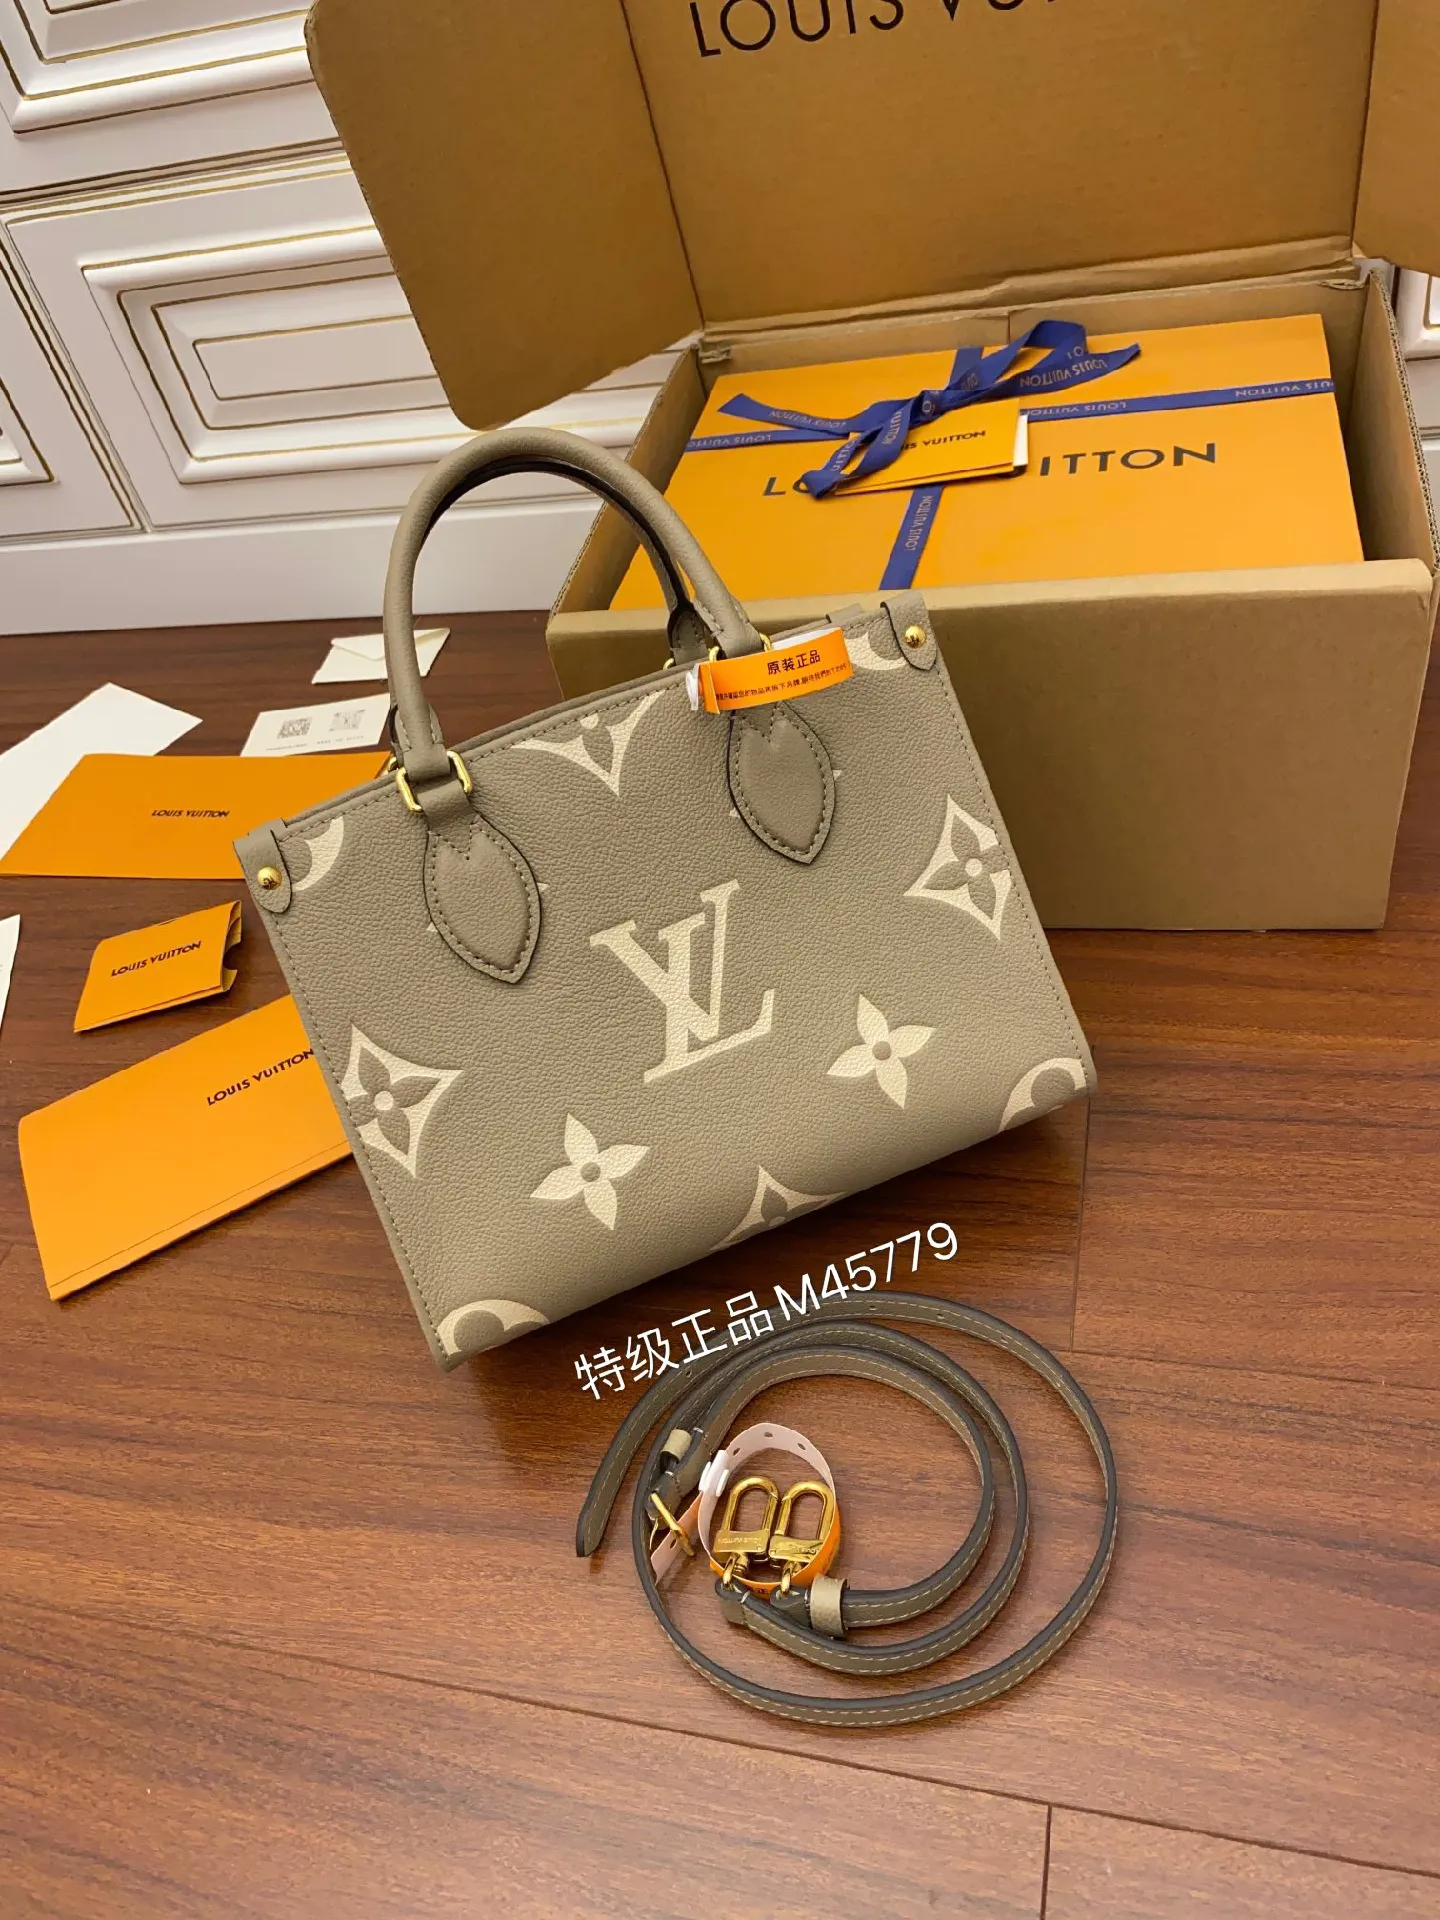 UNBOXING LOUIS VUITTON BOM DIA MULES SUPER EXCITED I finally got